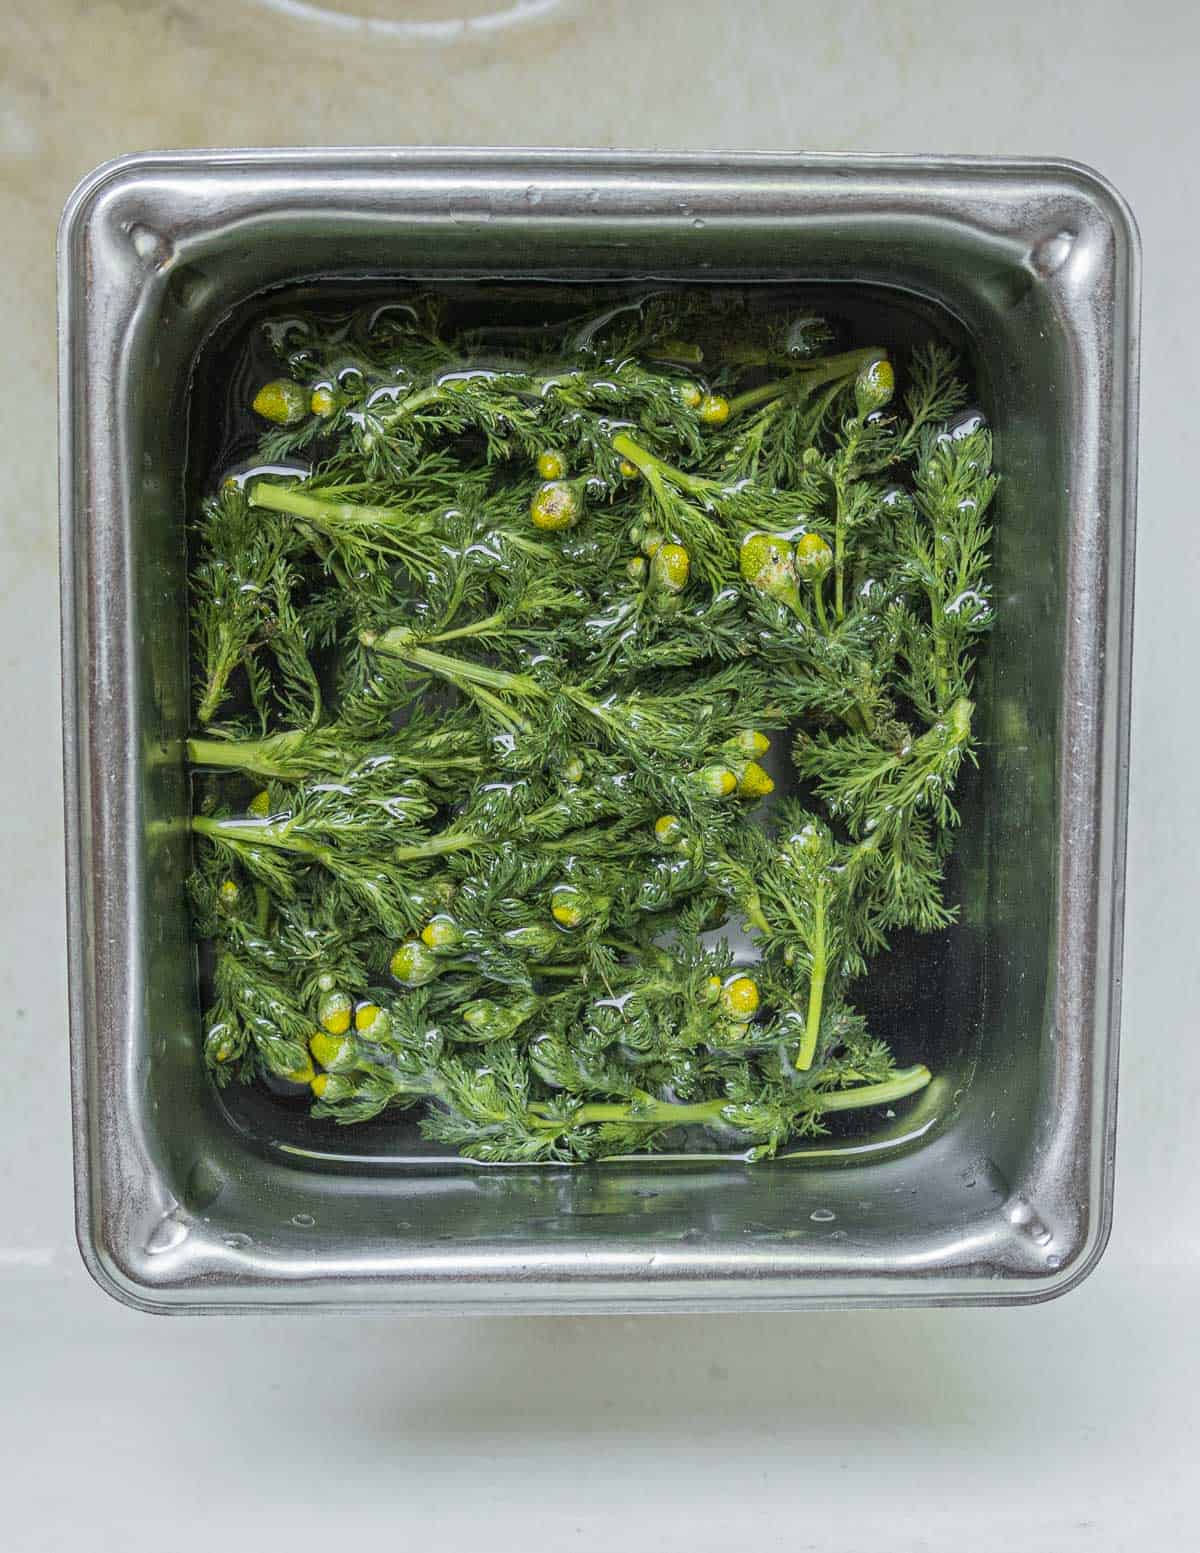 Soaking pineapple weed in water to refresh it. 